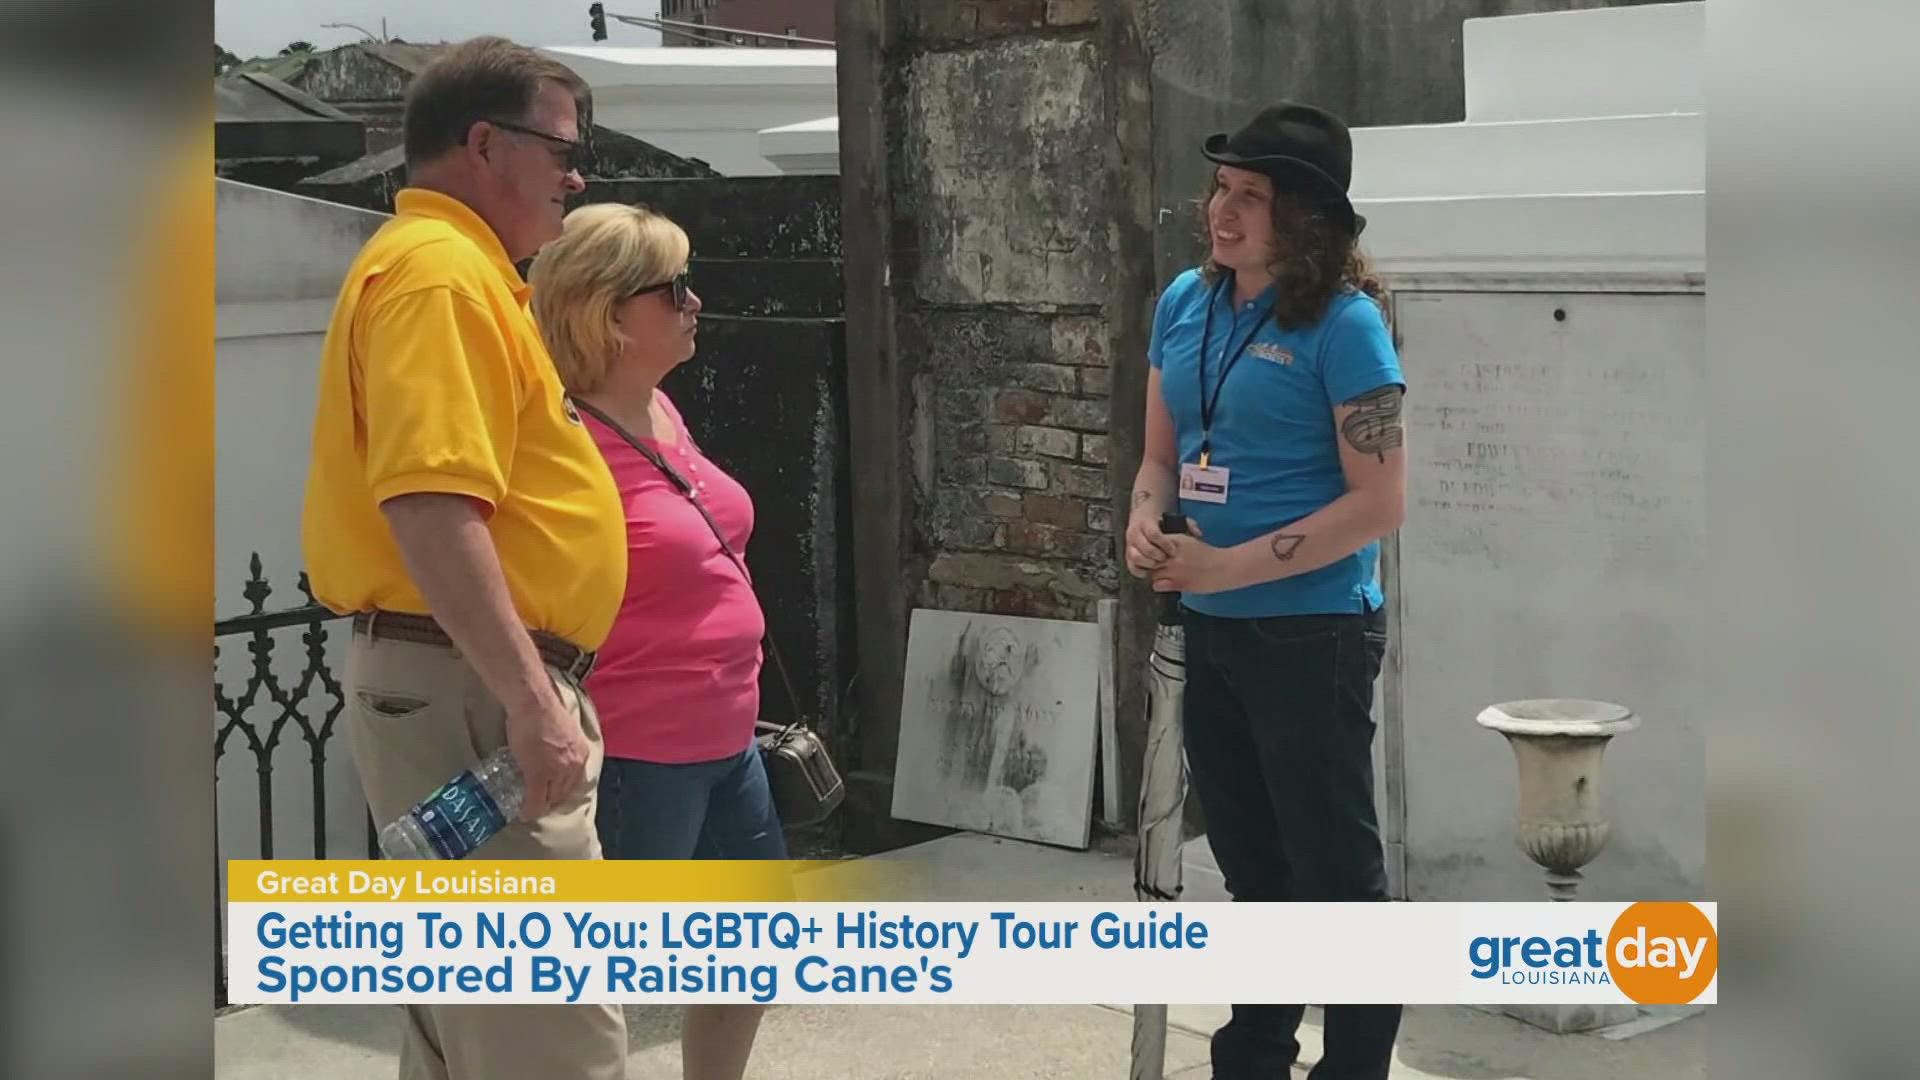 We got to know a local tour guide who specializes in the history of the LGBTQ+ community in New Orleans.